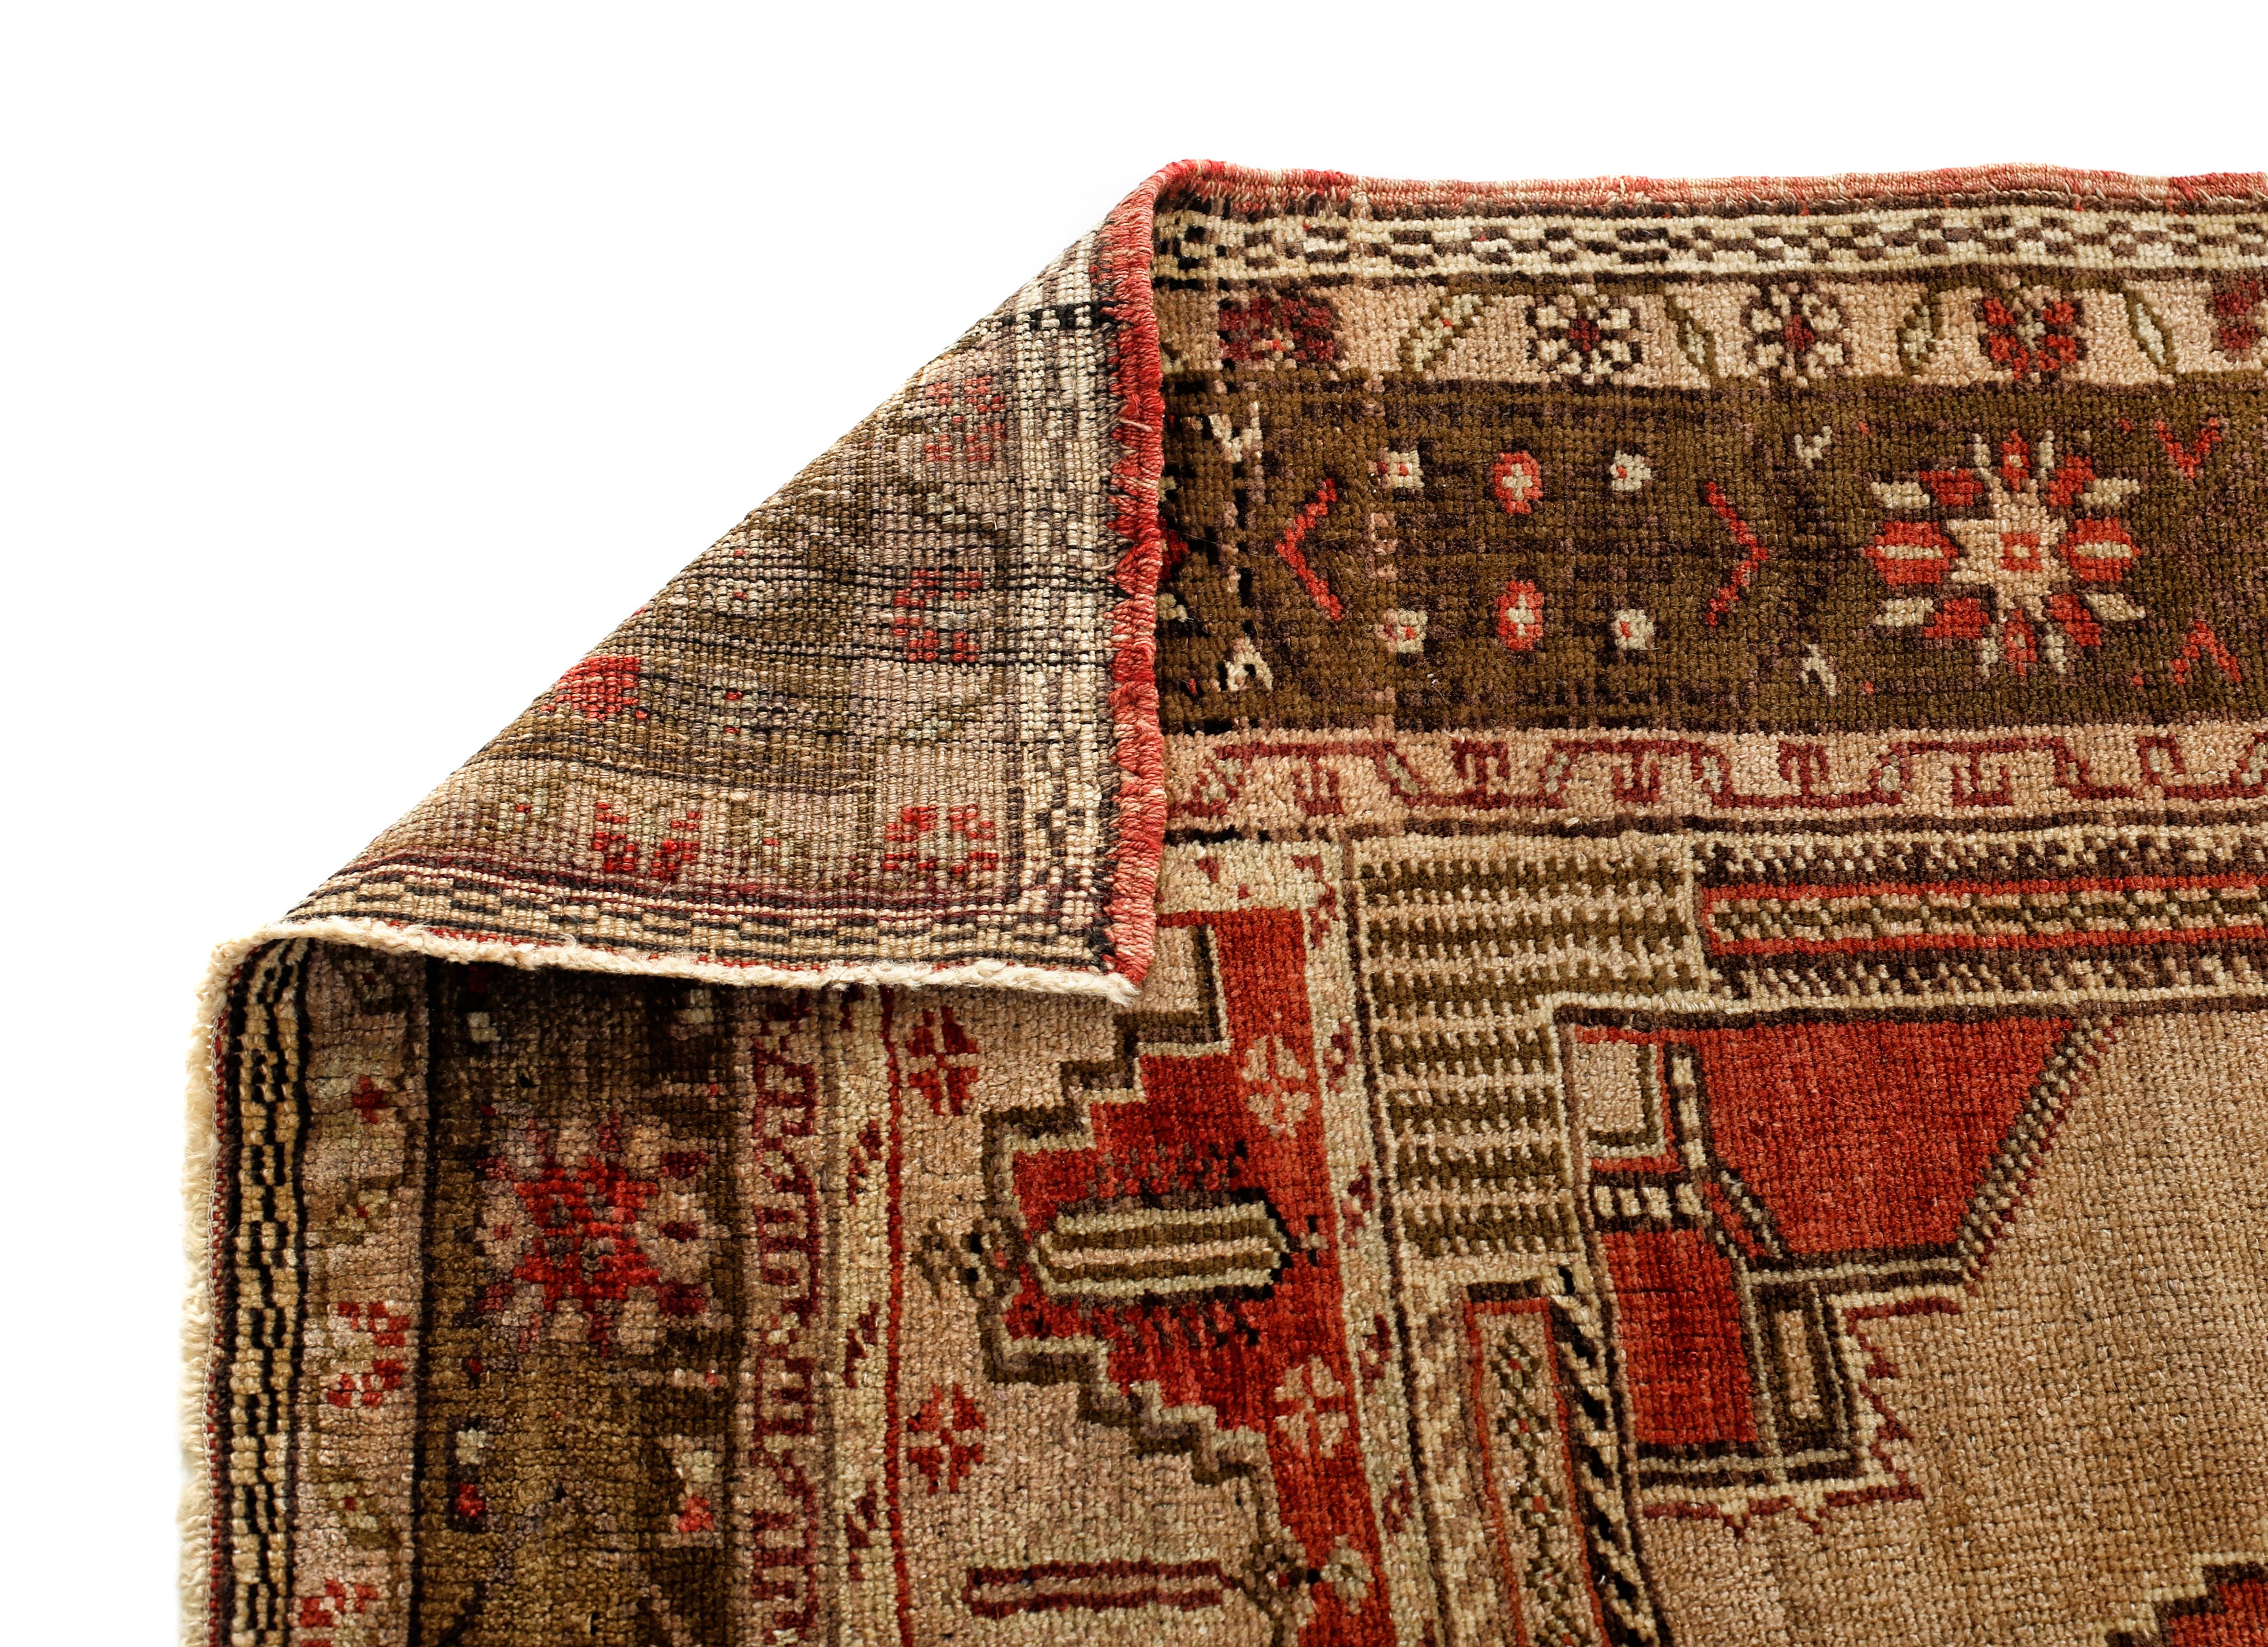 Anatolian rugs are hand knotted in the Central Anatolia or Asia Minor region of Turkey. The patterns are from Ottoman era as well as modern Turkey. The central medallion used in this rug symbolizes the central authority of the Ottoman Sultans. In